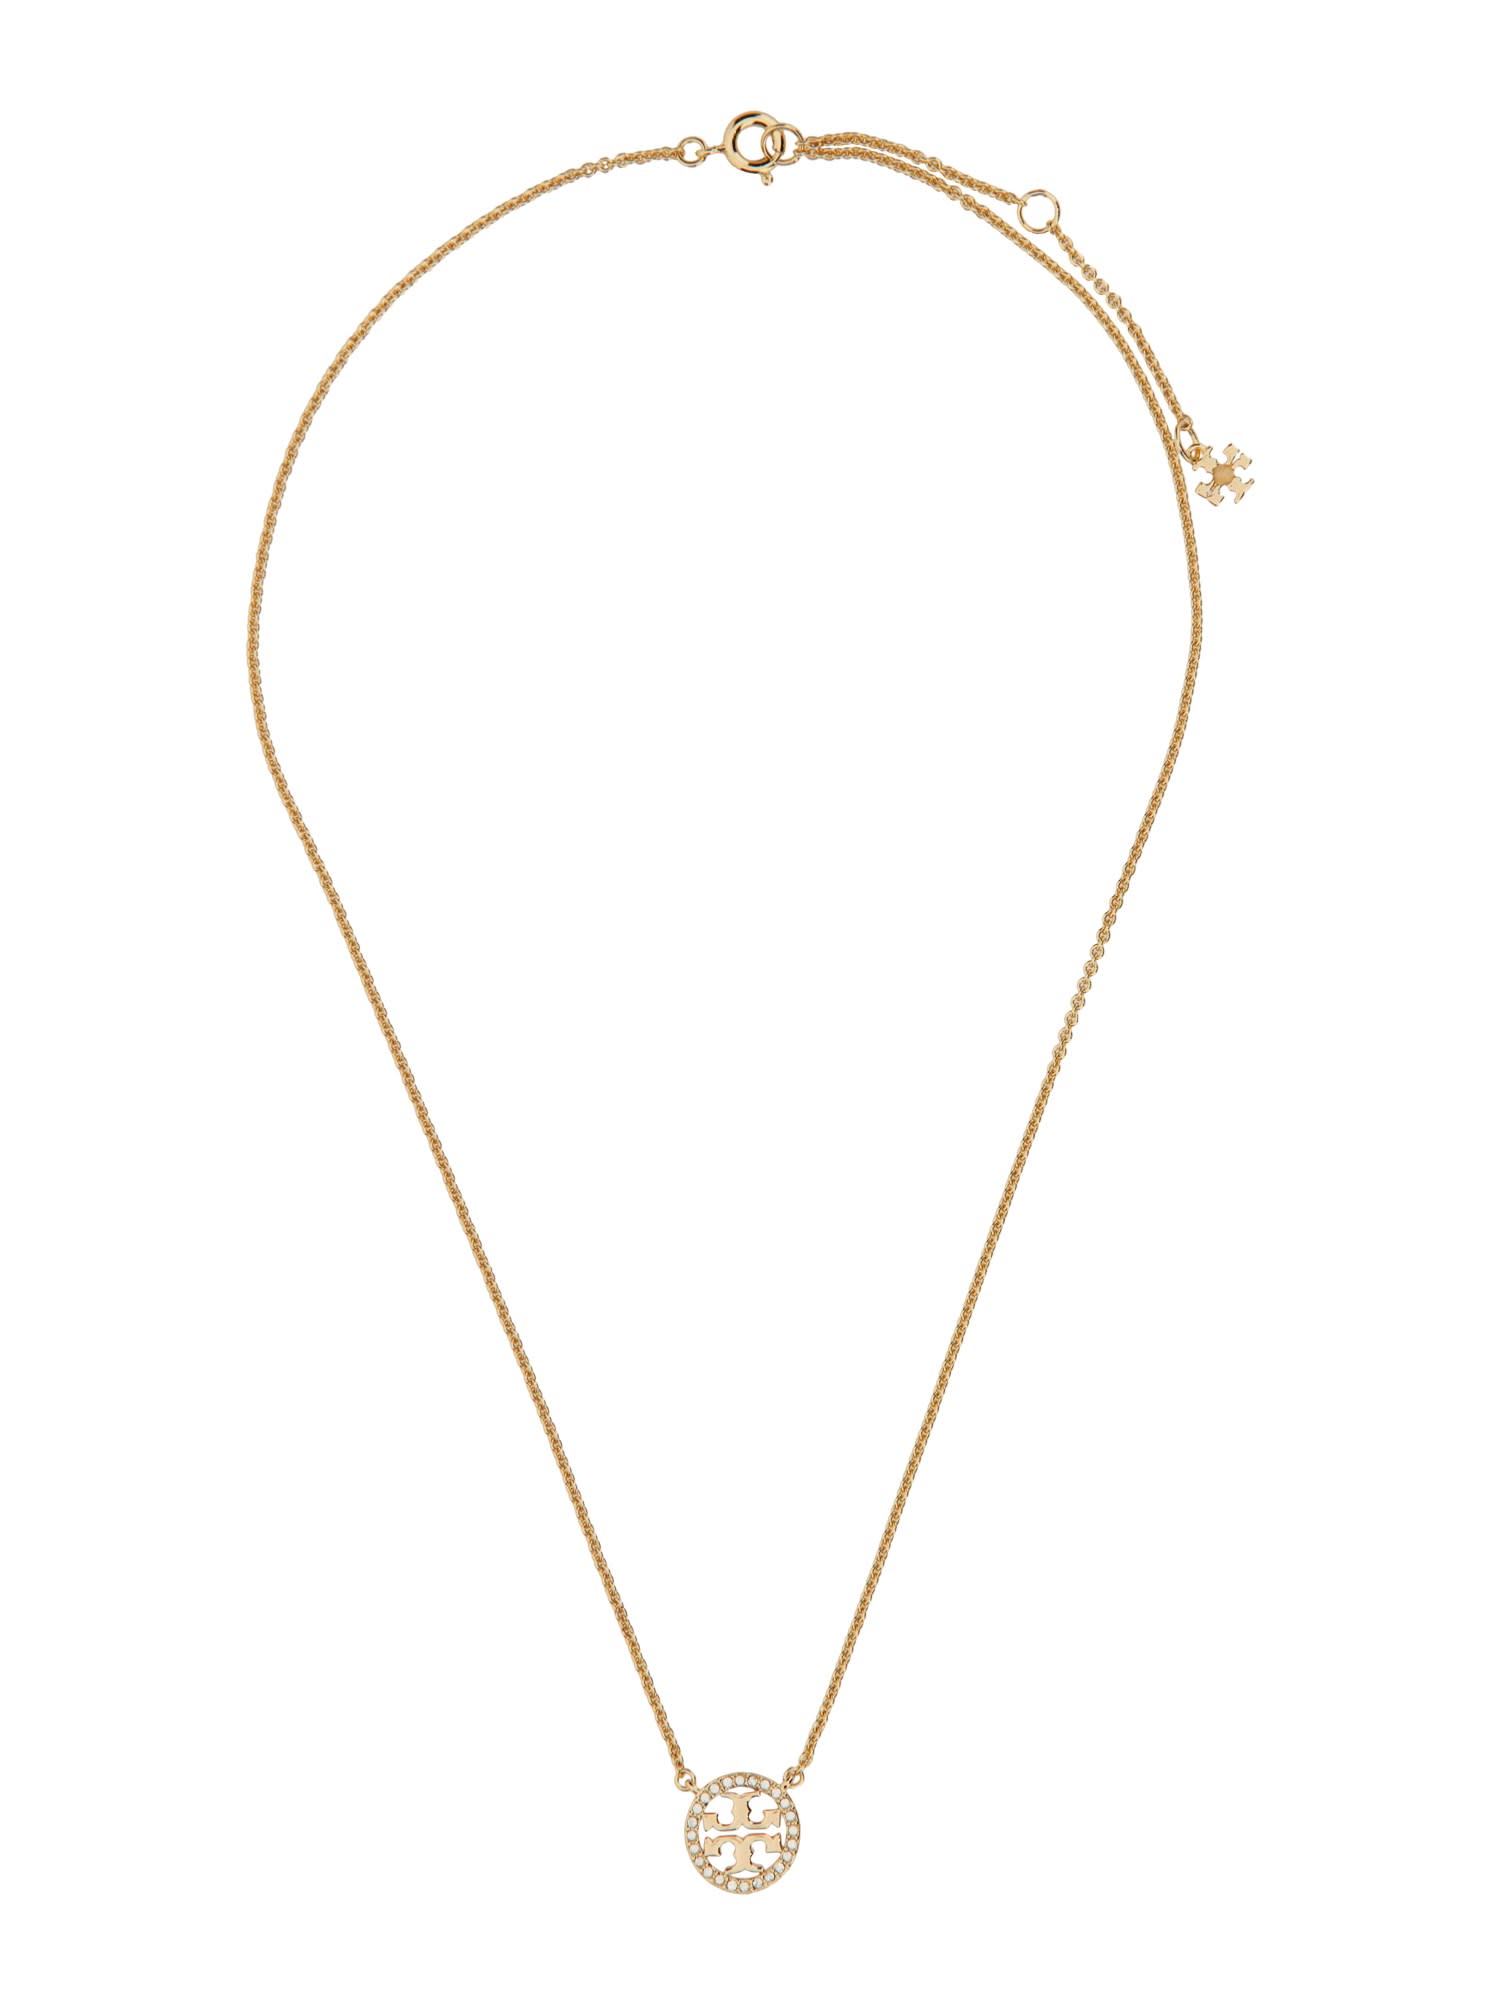 Tory Burch Crystal Logo Necklace